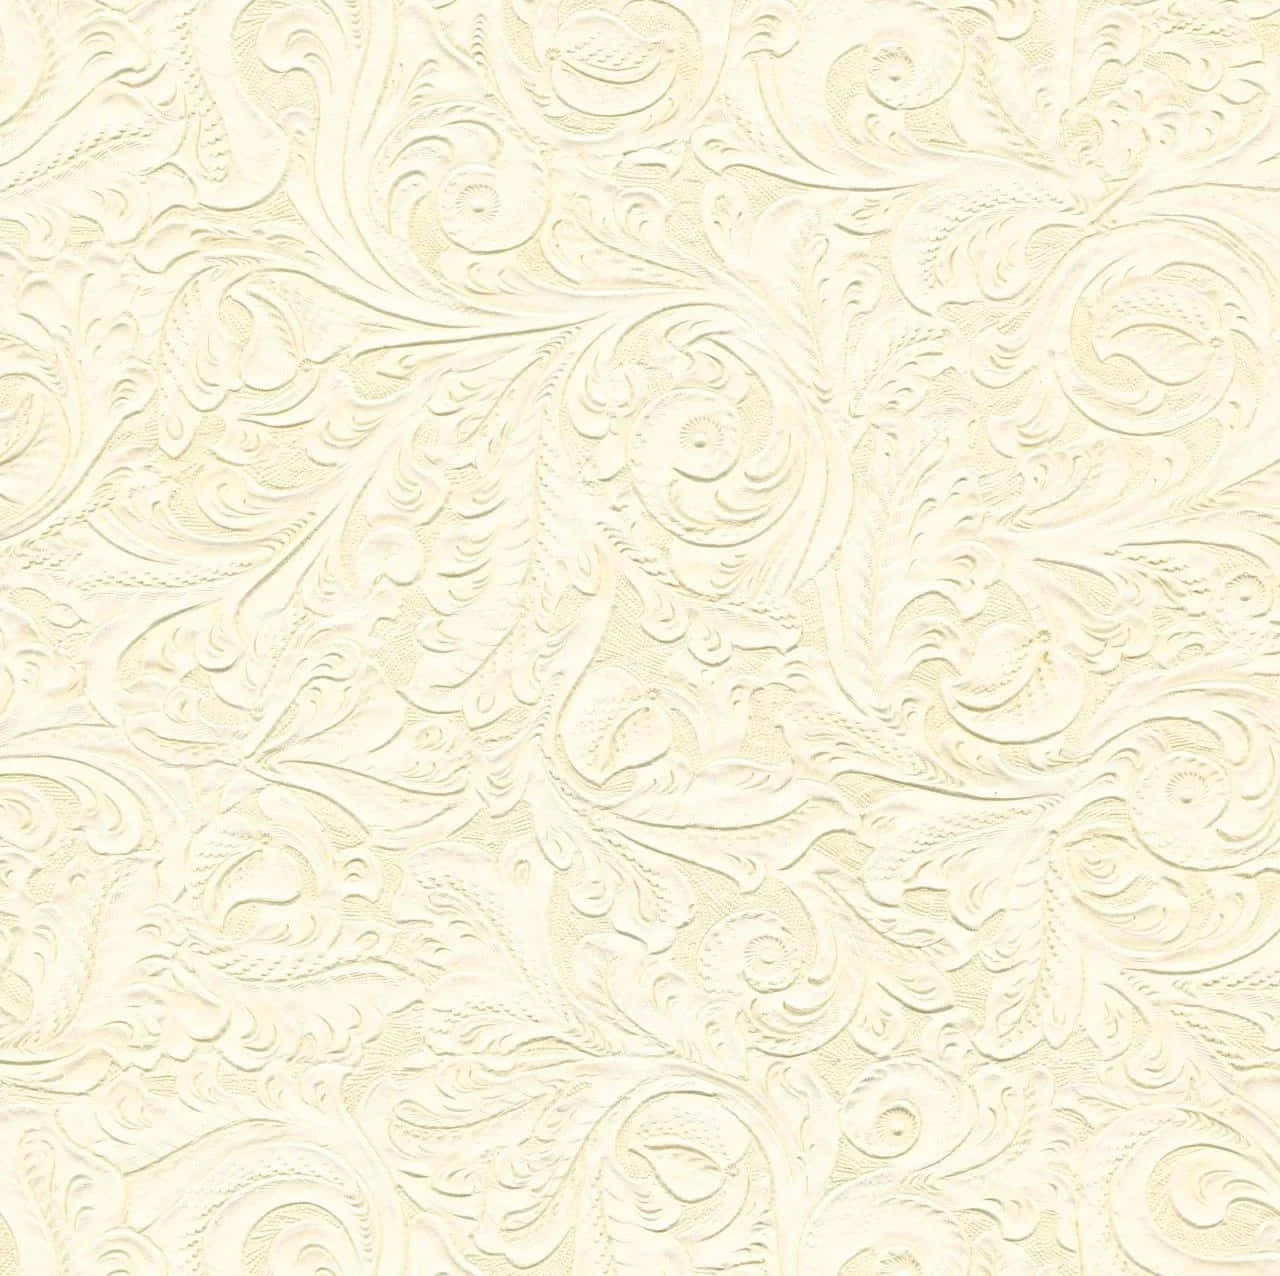 A Soft Cream-colored Background Texture